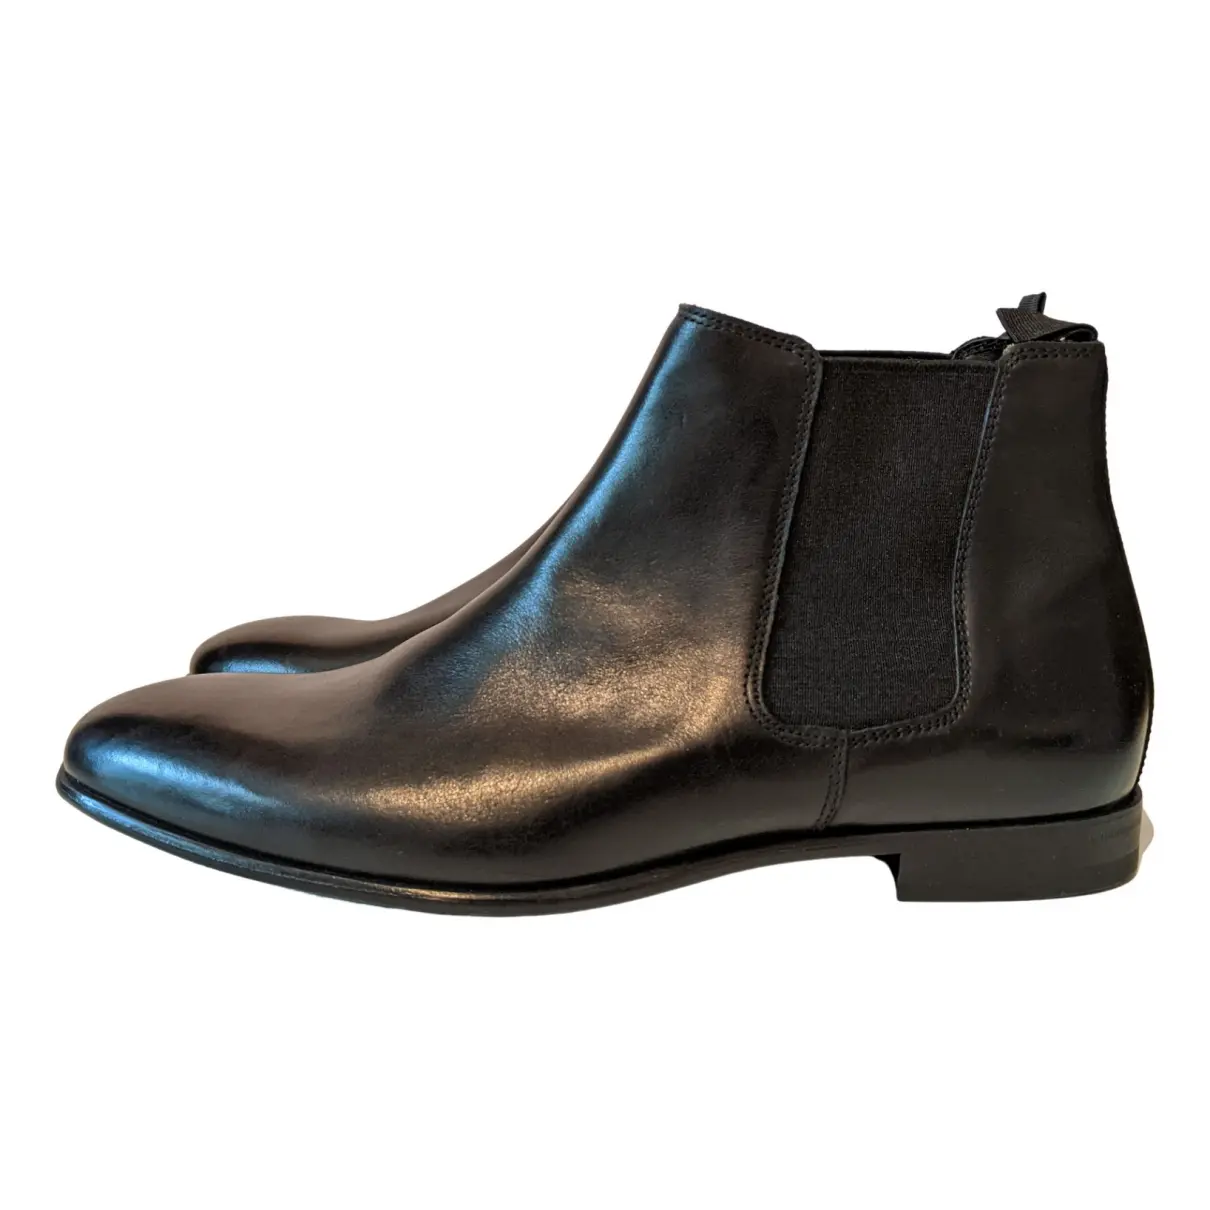 Leather boots Zara